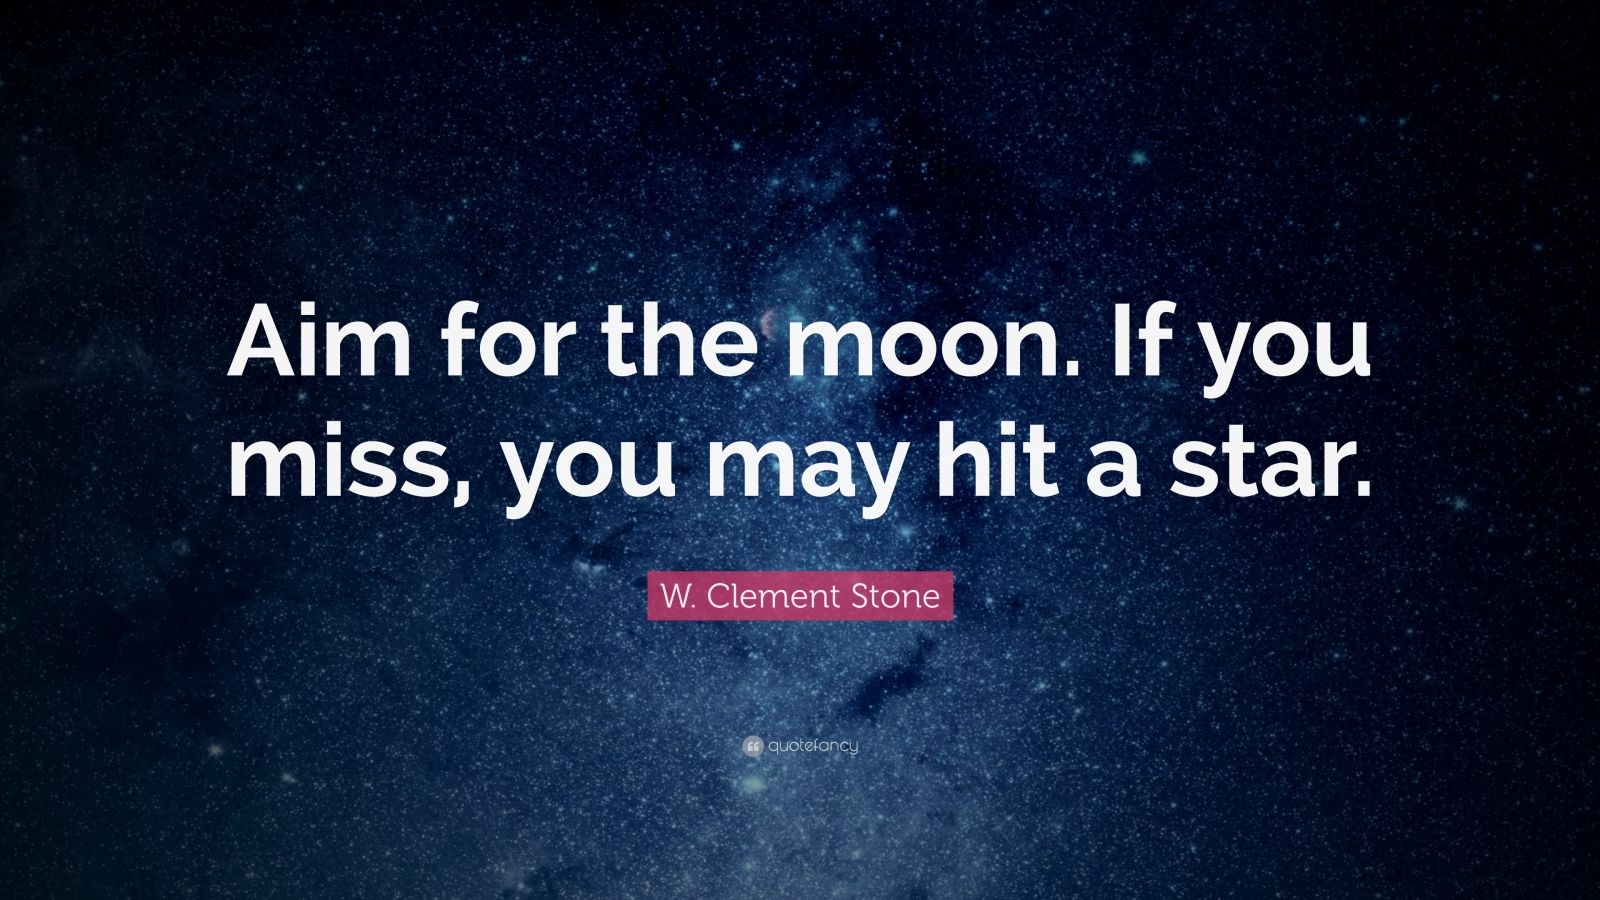 W. Clement Stone Quote: “Aim for the moon. If you miss ...